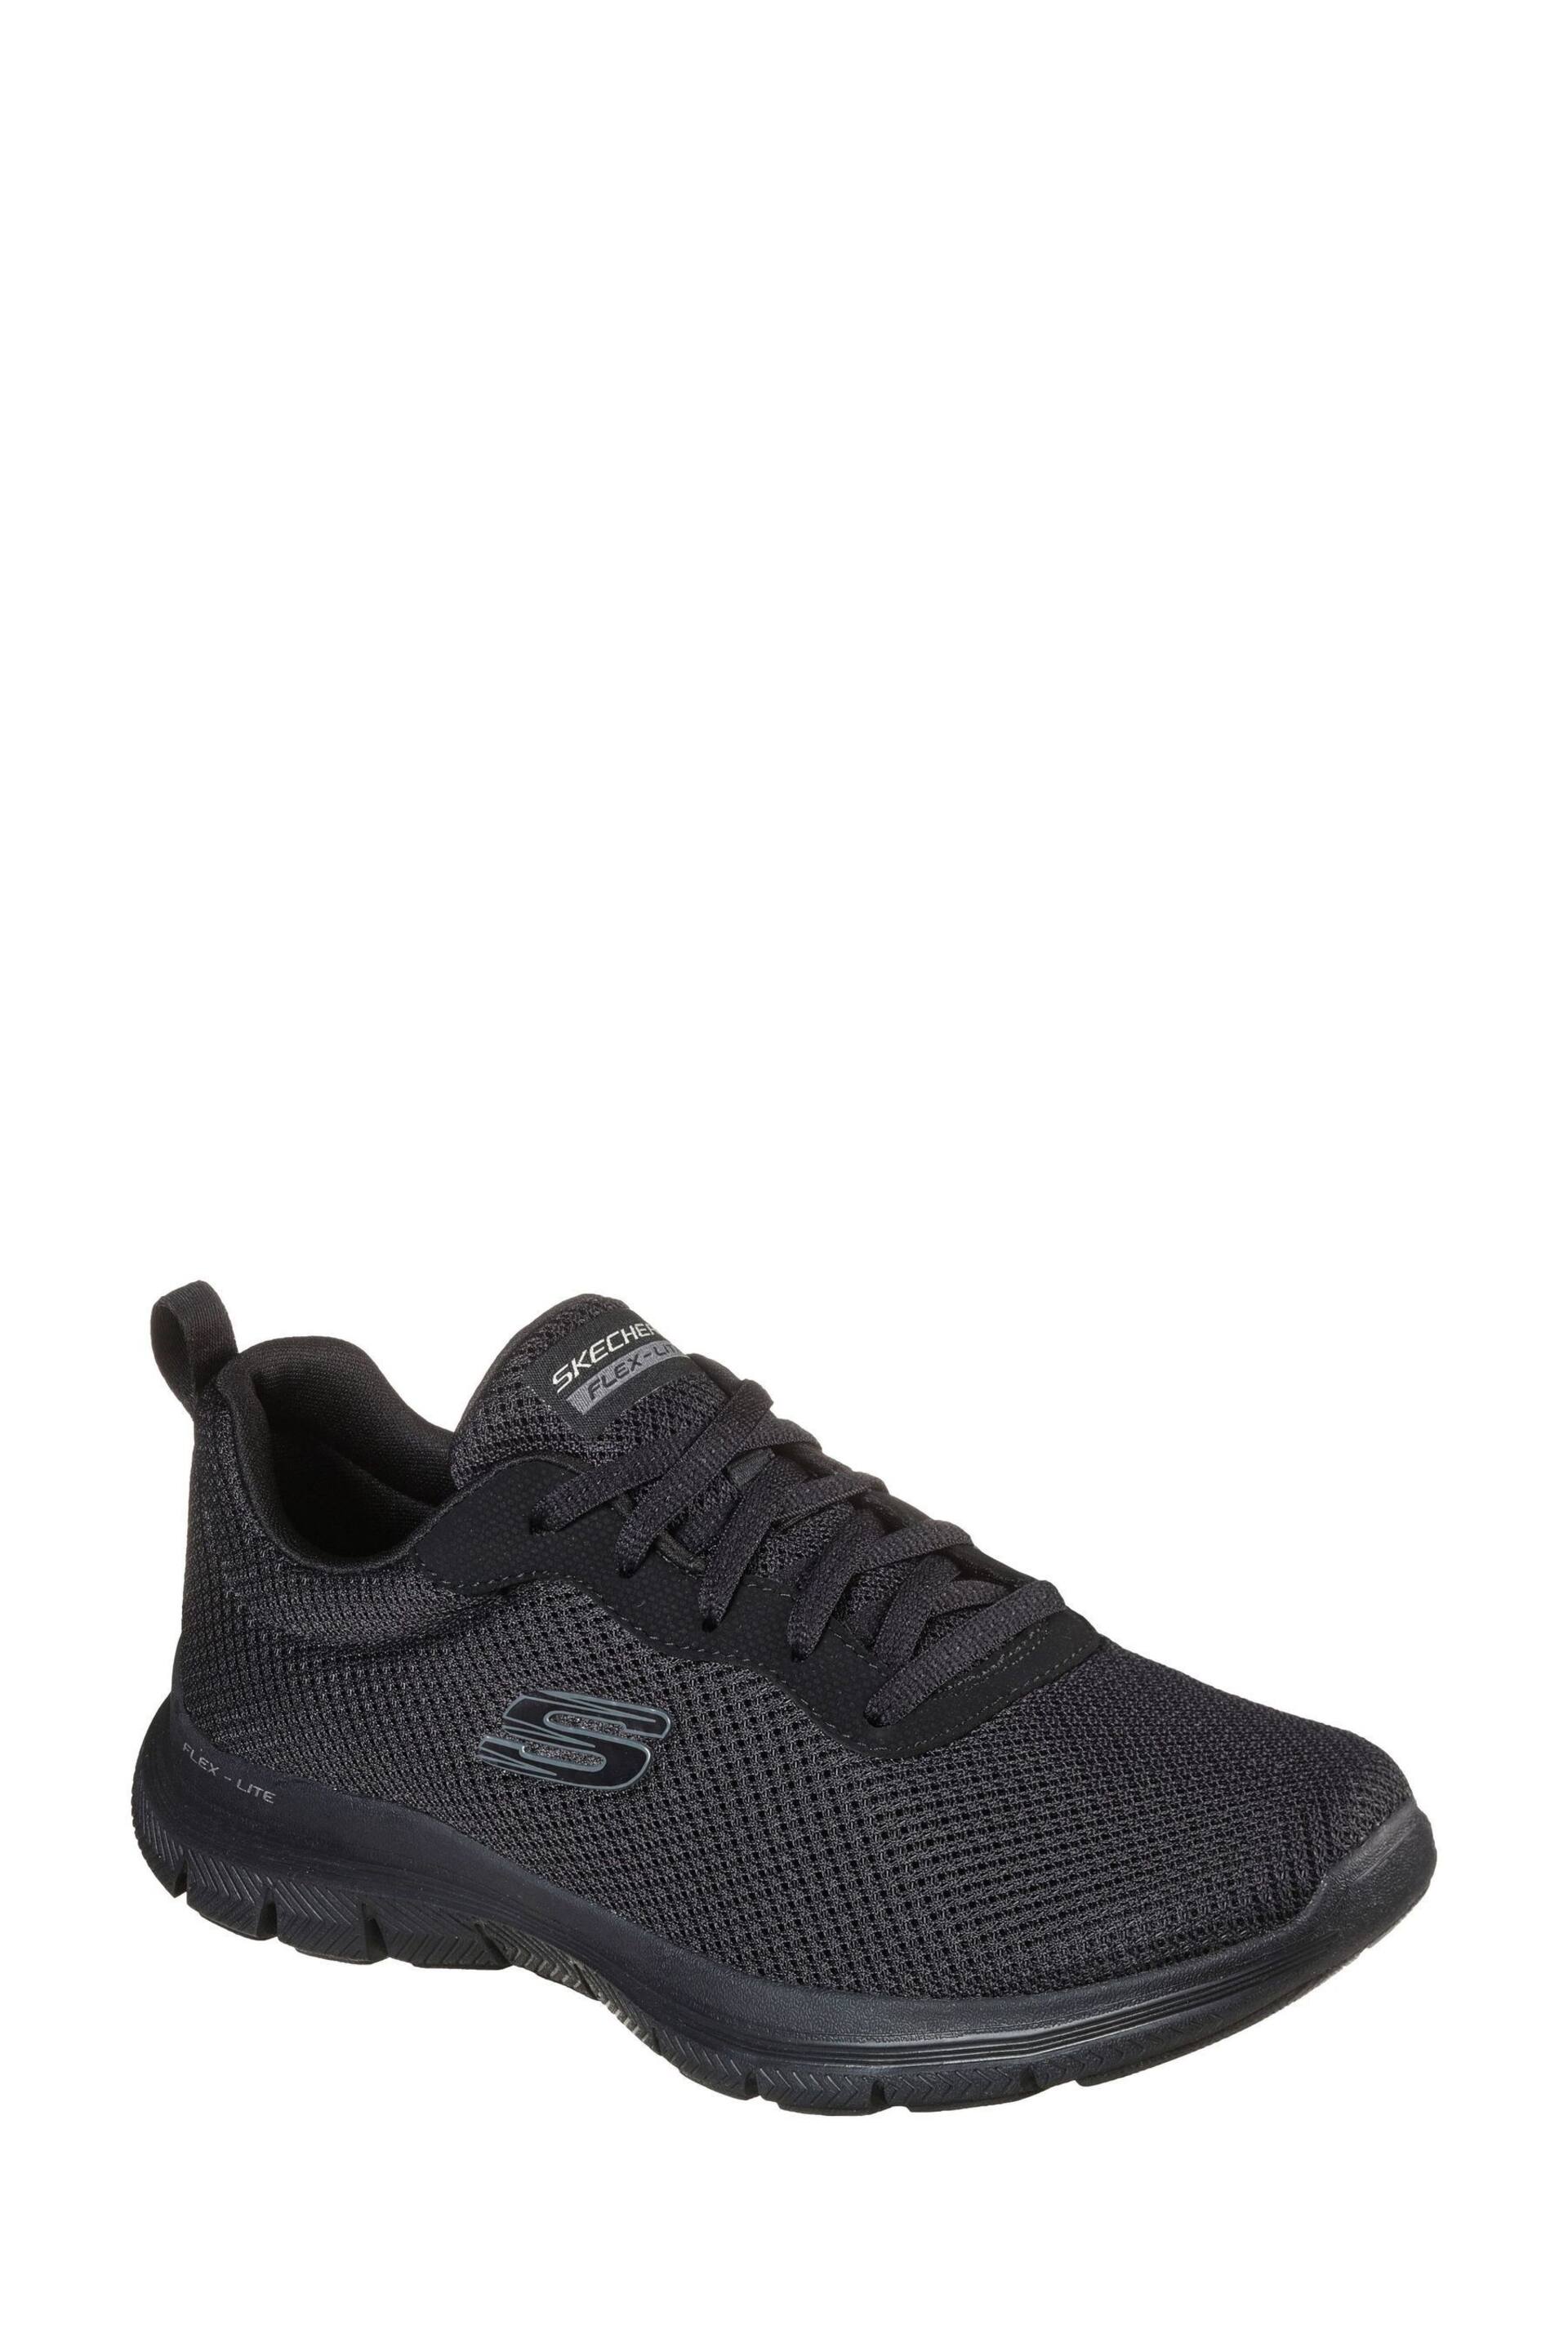 Skechers Black Flex Appeal 4.0 Brilliant View Womens Trainers - Image 5 of 8